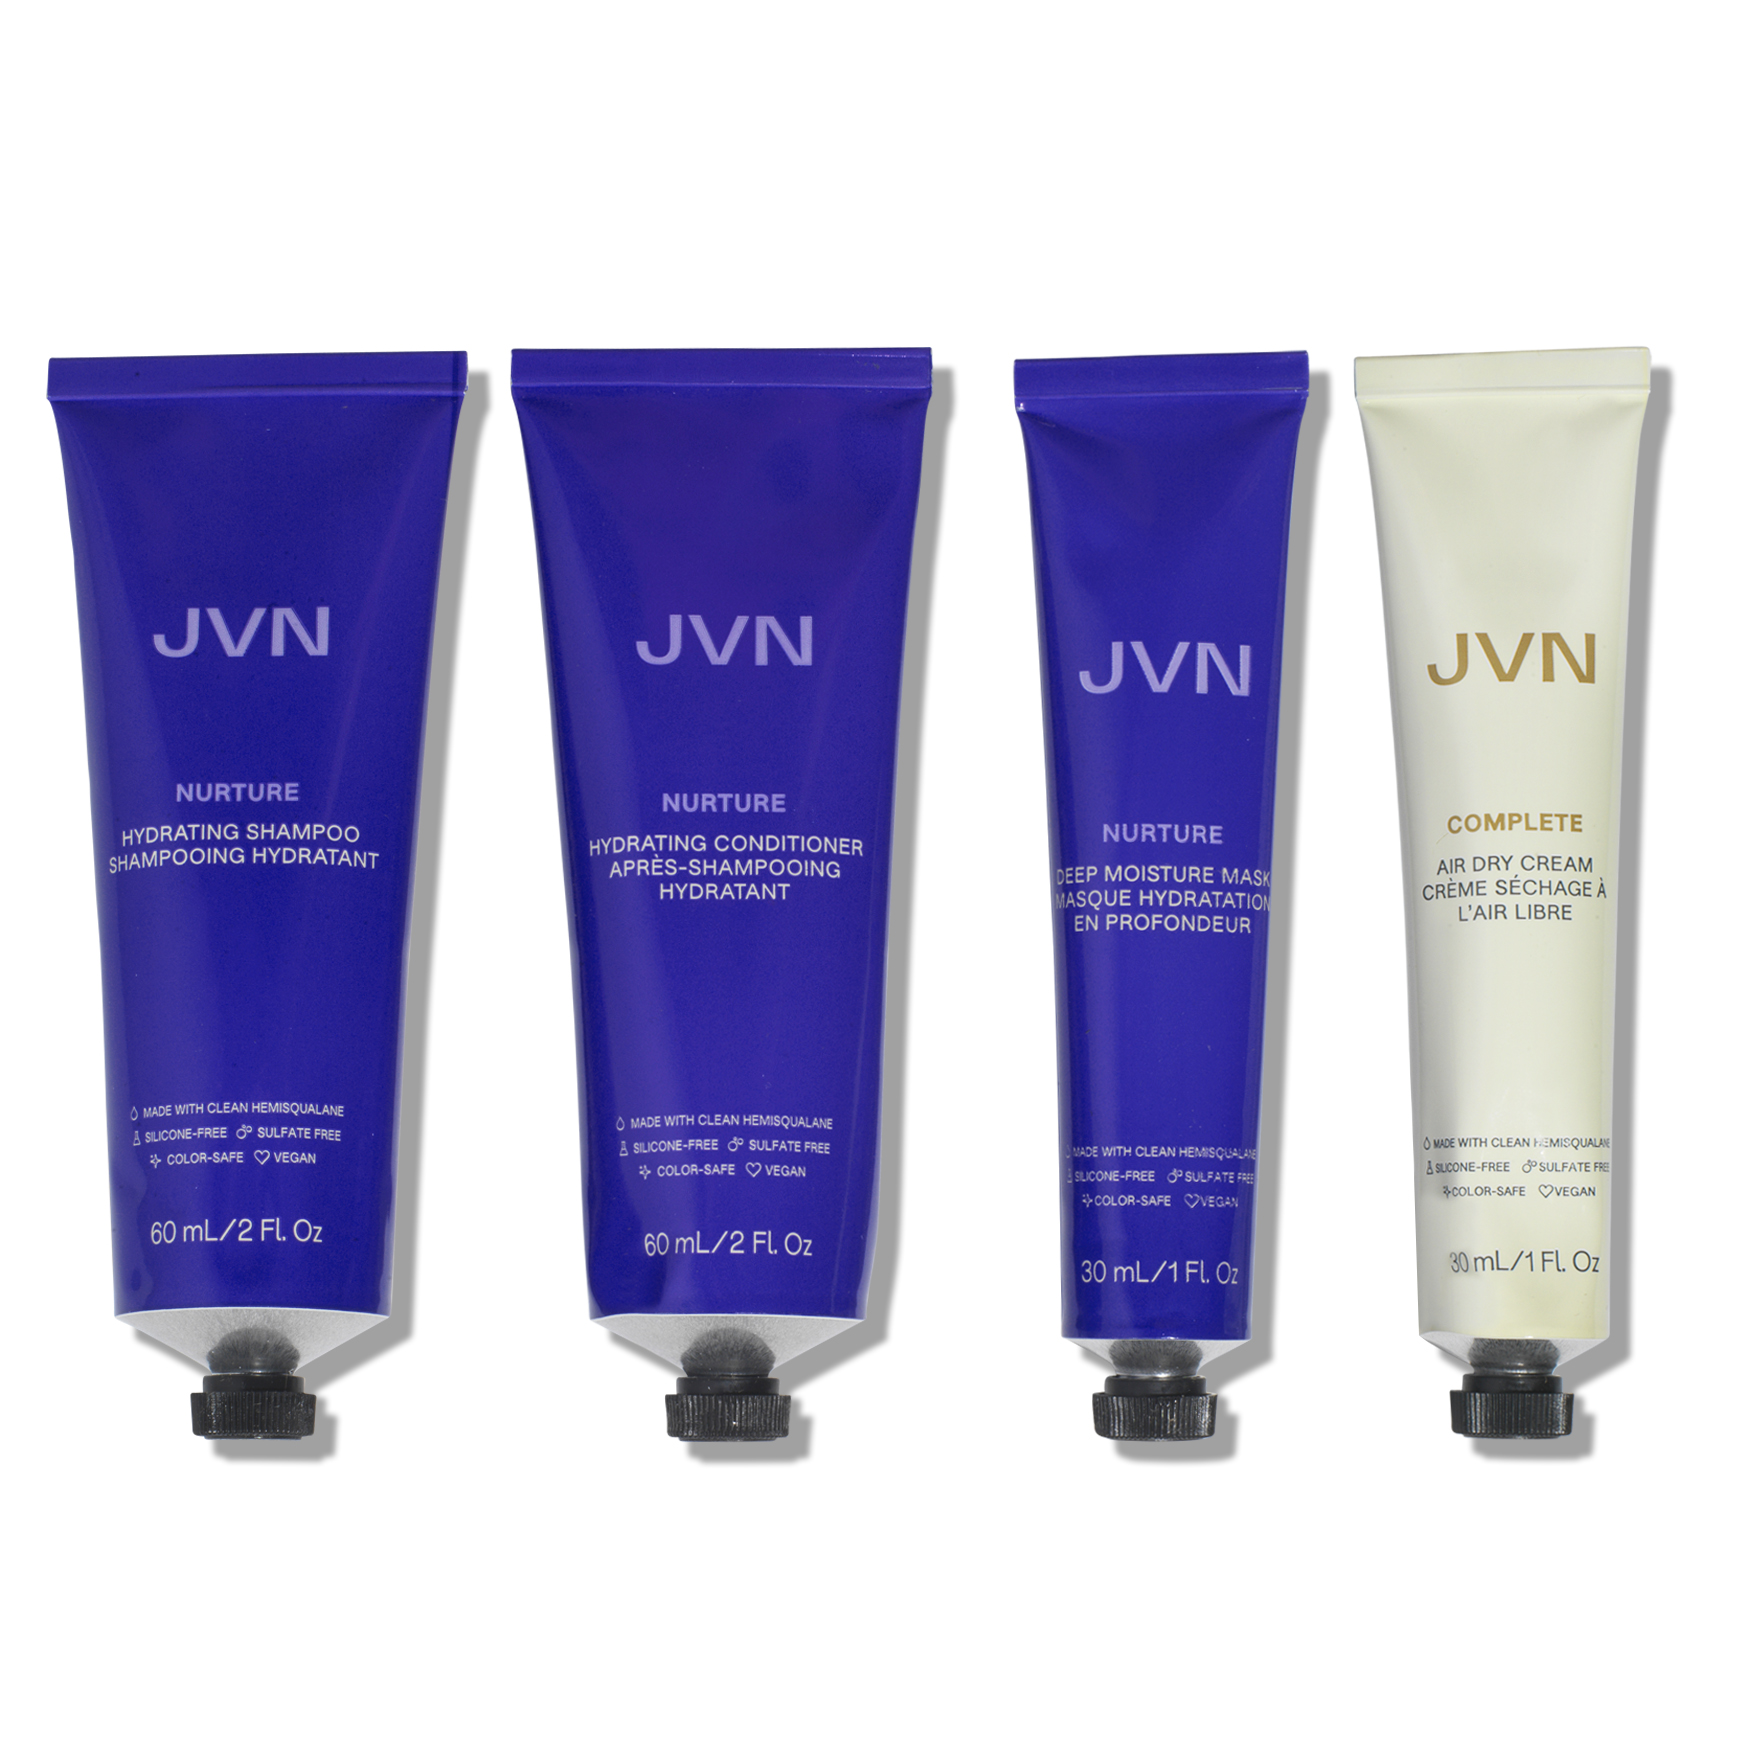 JVN Hair Complete Hydration Kit | Space NK